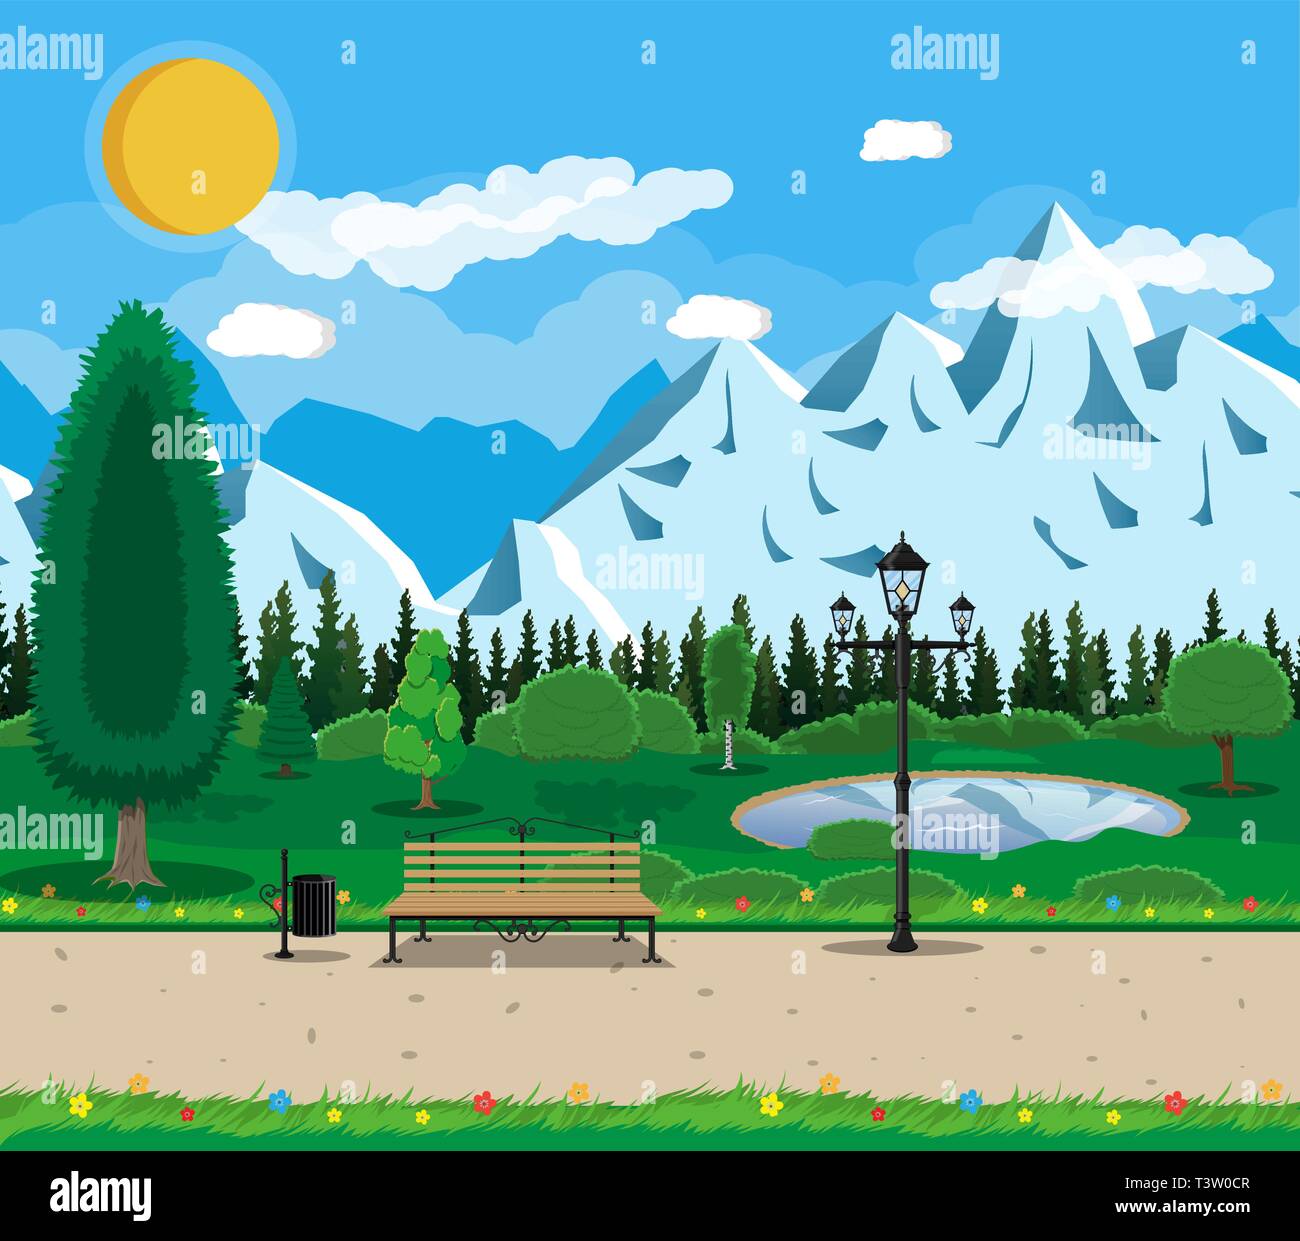 Mountain park concept, wooden bench, street lamp, waste bin in square. Rocky mountains, lake and trees. Sky with clouds and sun. Leisure time in summe Stock Vector